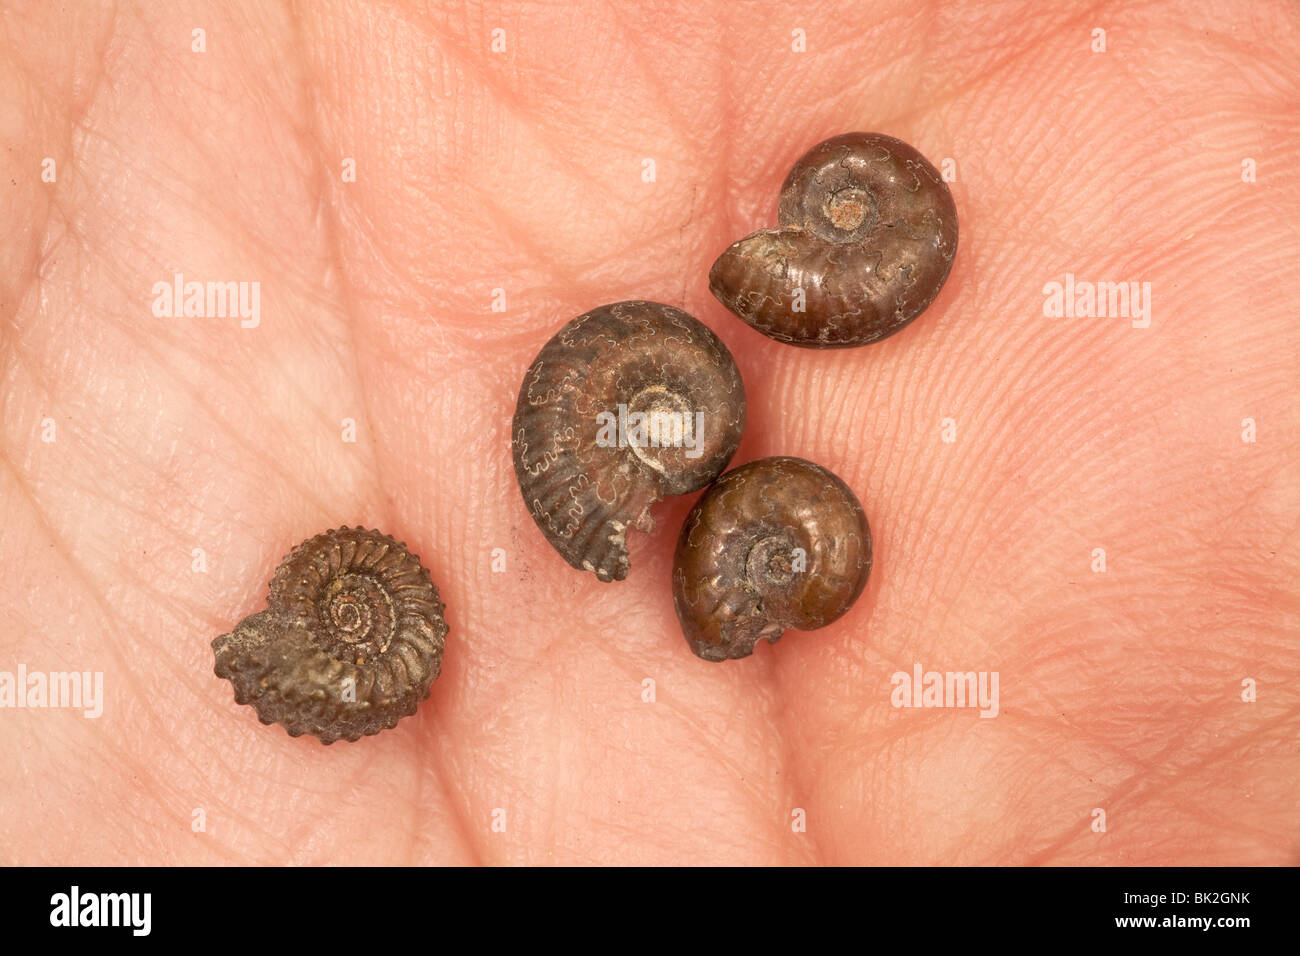 Pyritized fossil ammonites, tiny specimens held in the palm of a hand Stock Photo